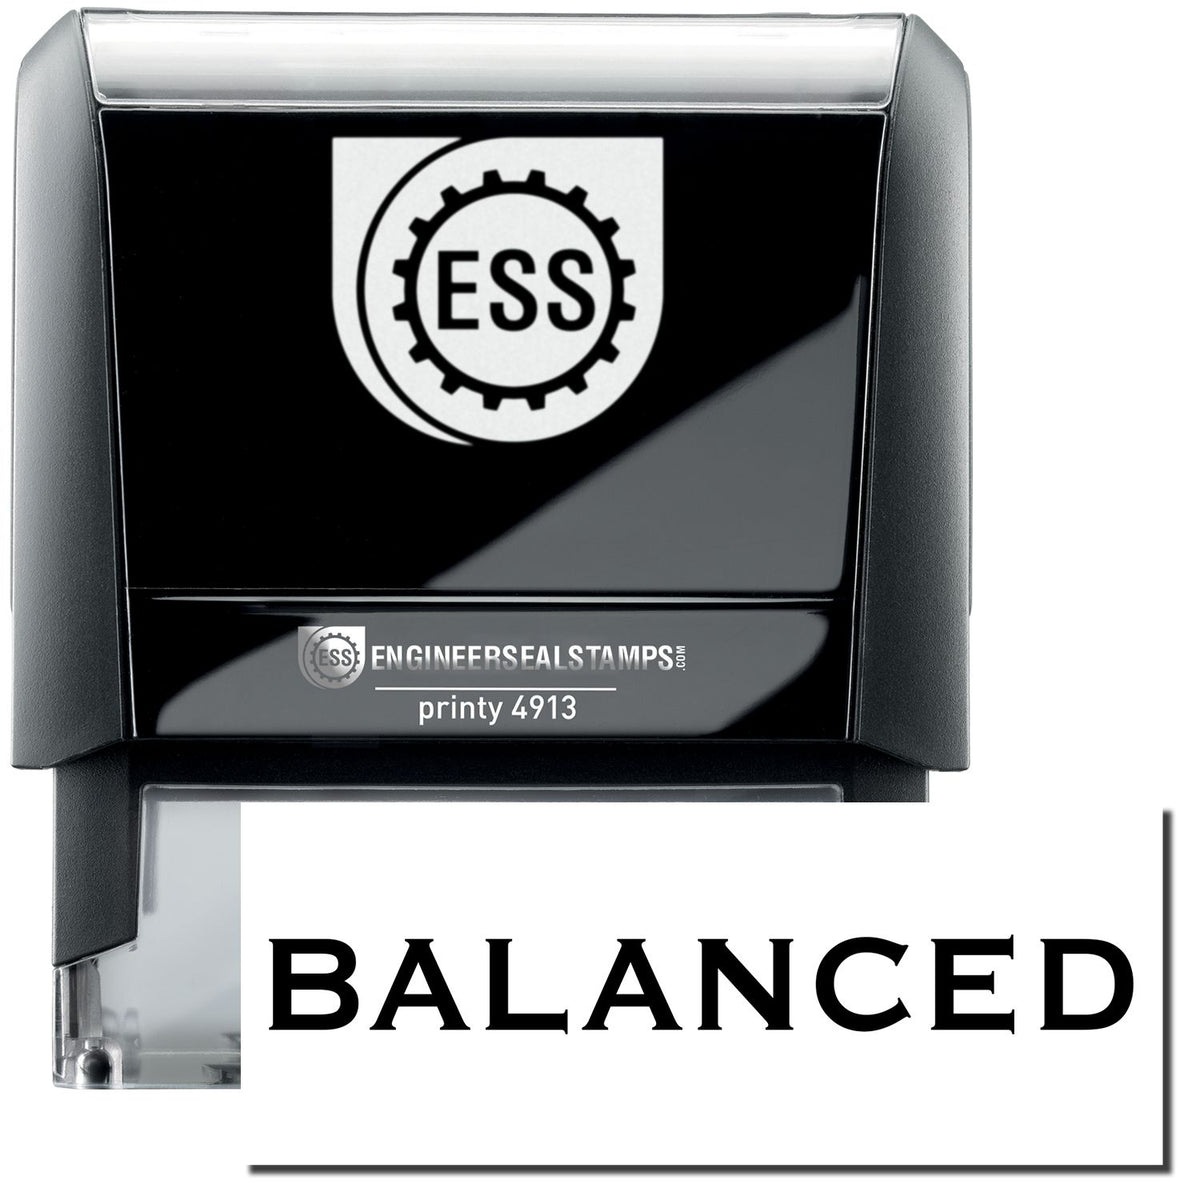 A self-inking stamp with a stamped image showing how the text &quot;BALANCED&quot; in a large bold font is displayed by it.